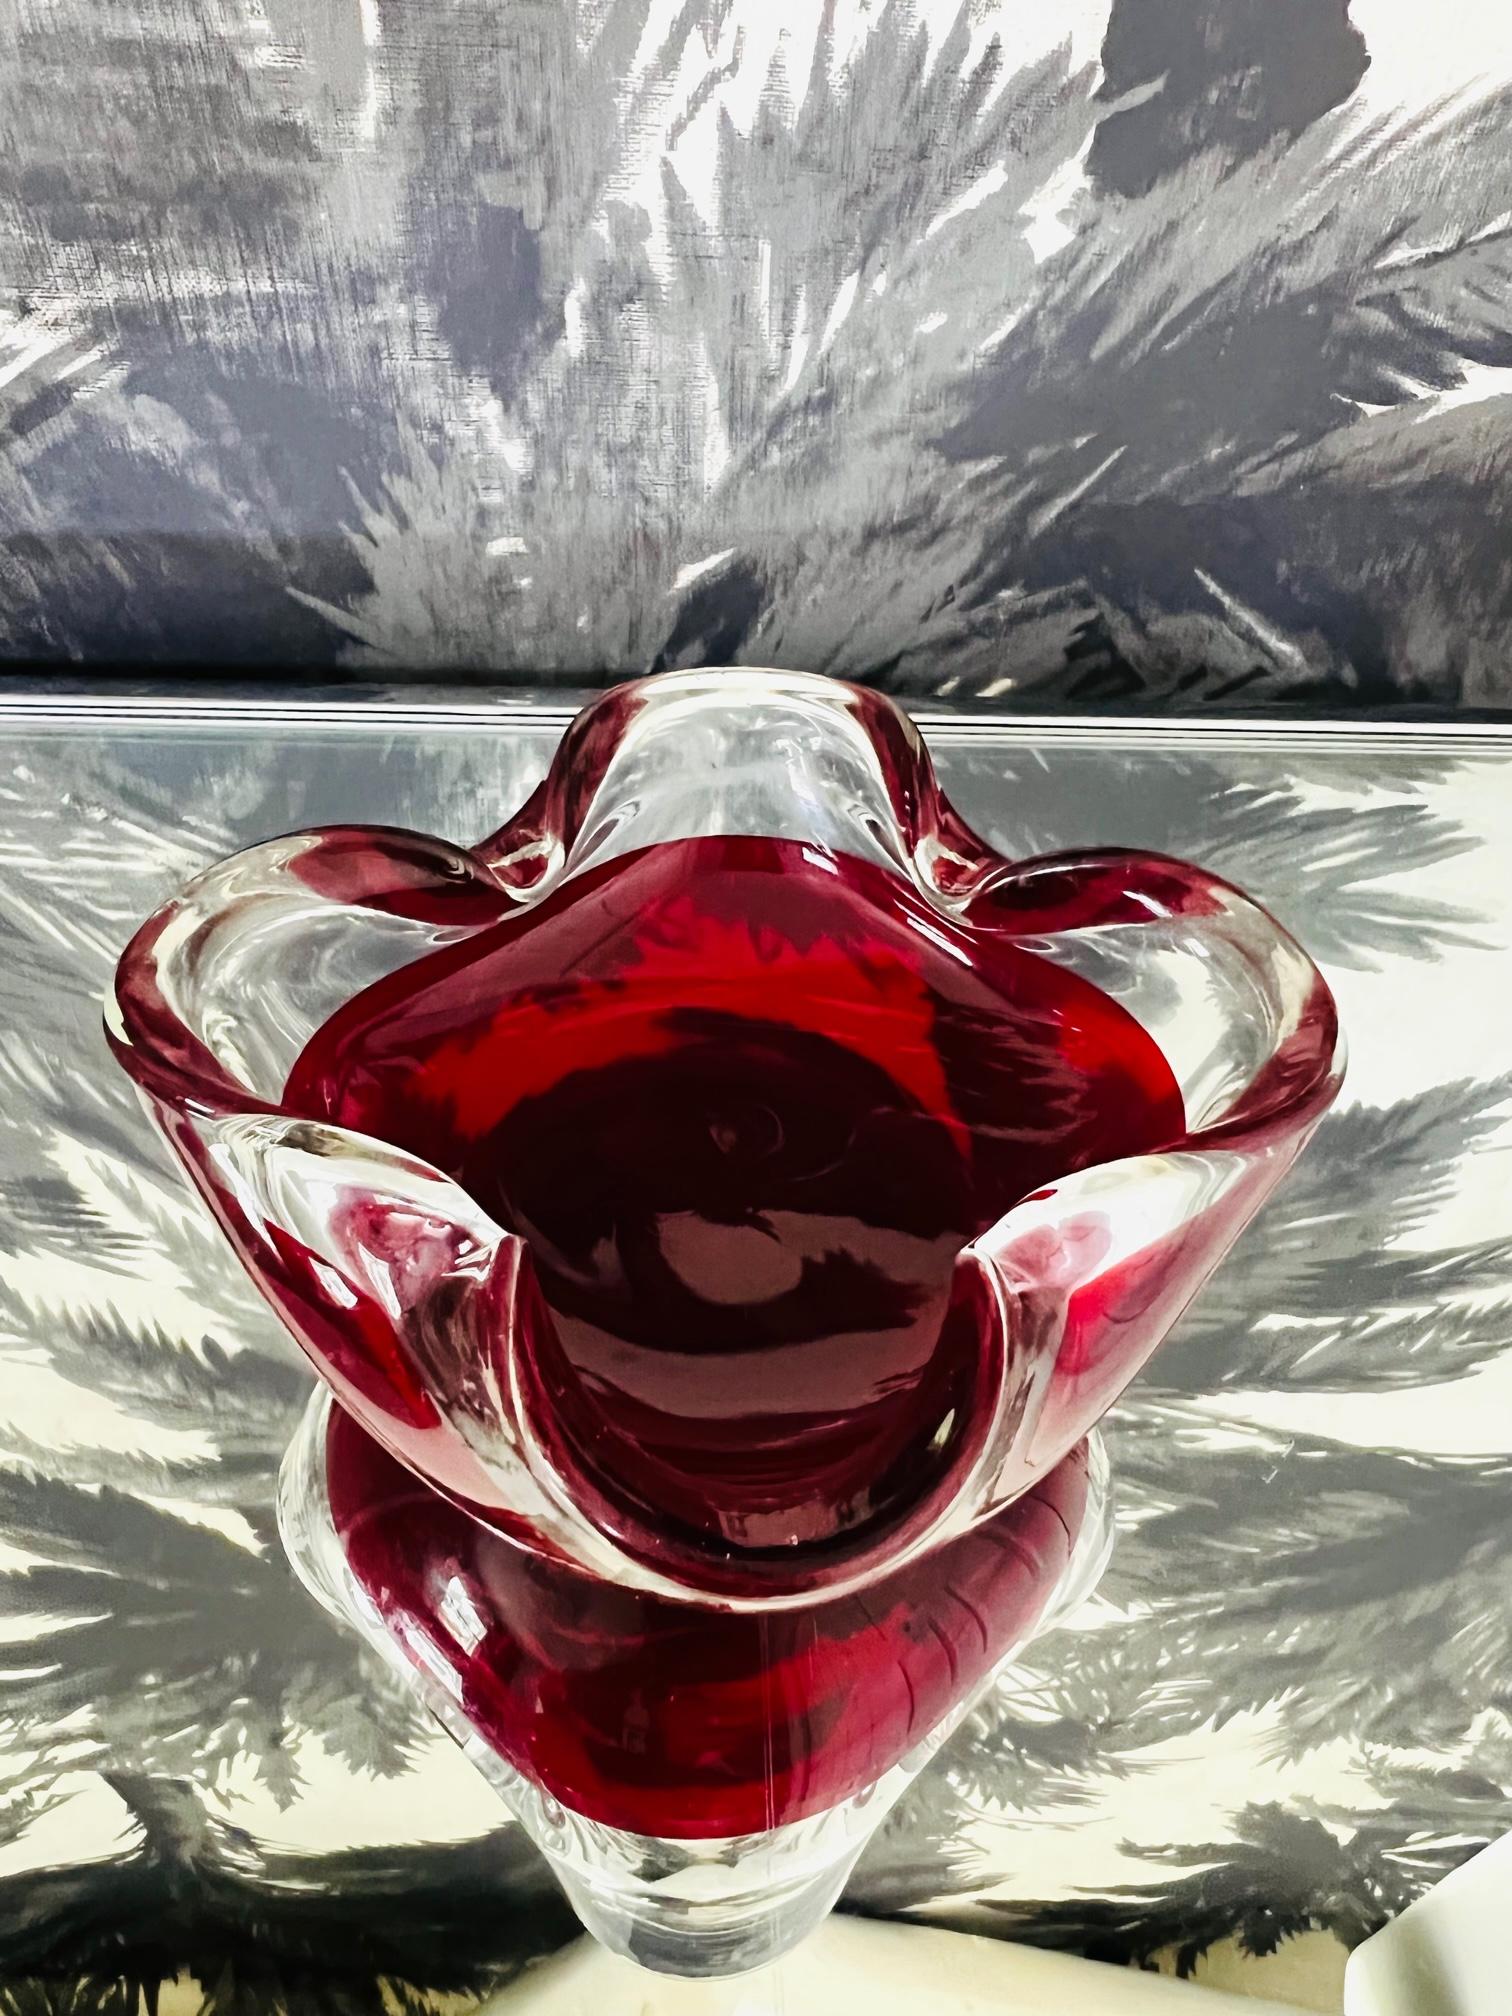 Italian Mid-Century Modern Murano Glass Bowl or Ashtray in Red, Italy, c. 1960's